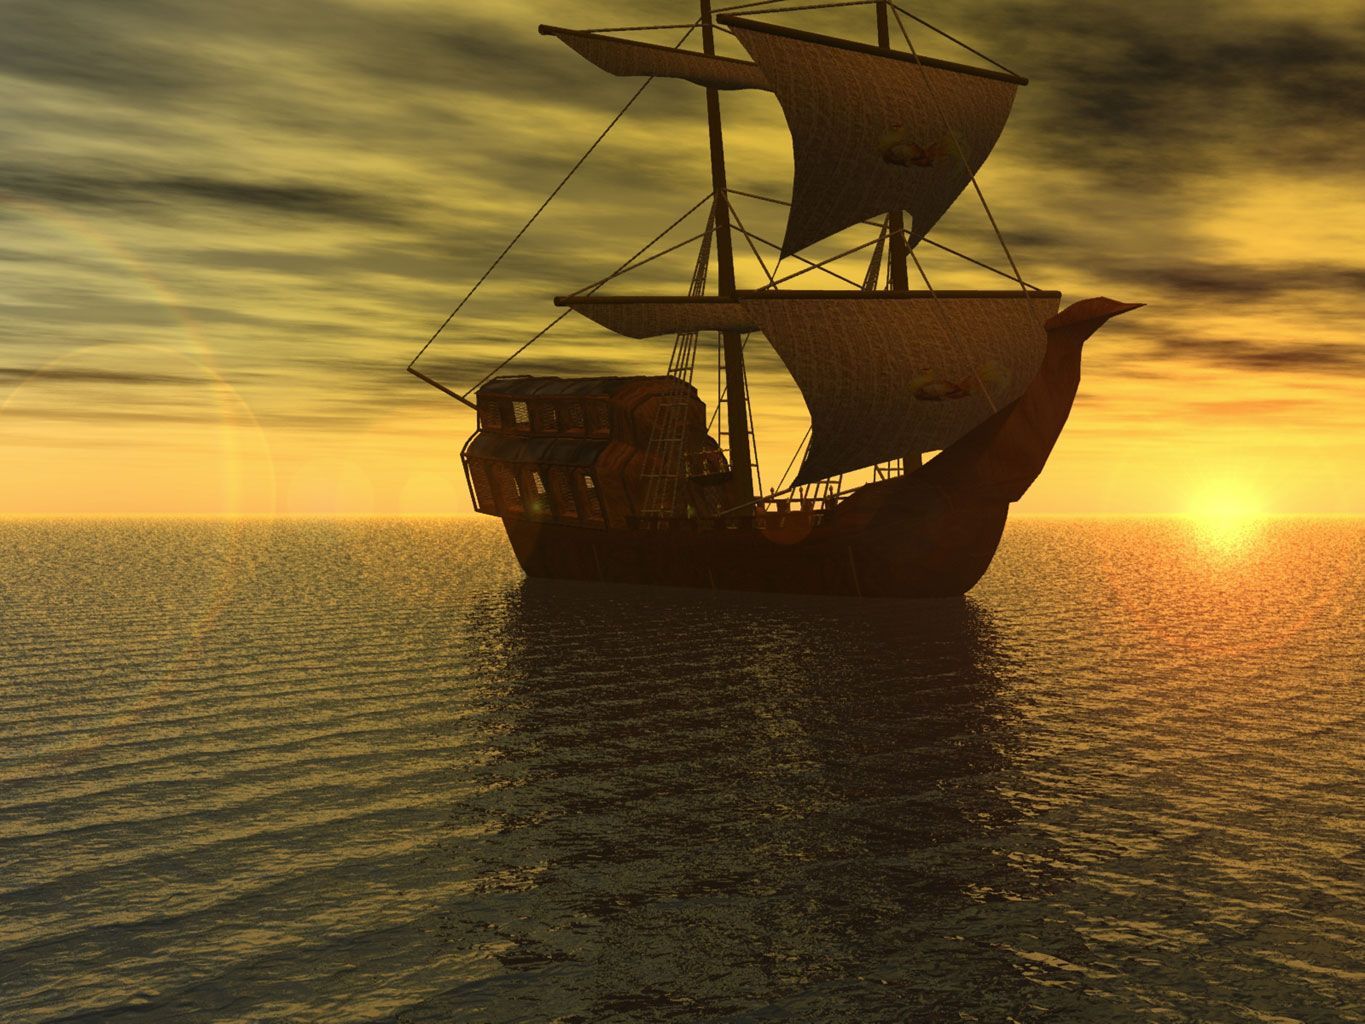 ship Archives - Album Art for Musicians & Wallpapers Backgrounds ...